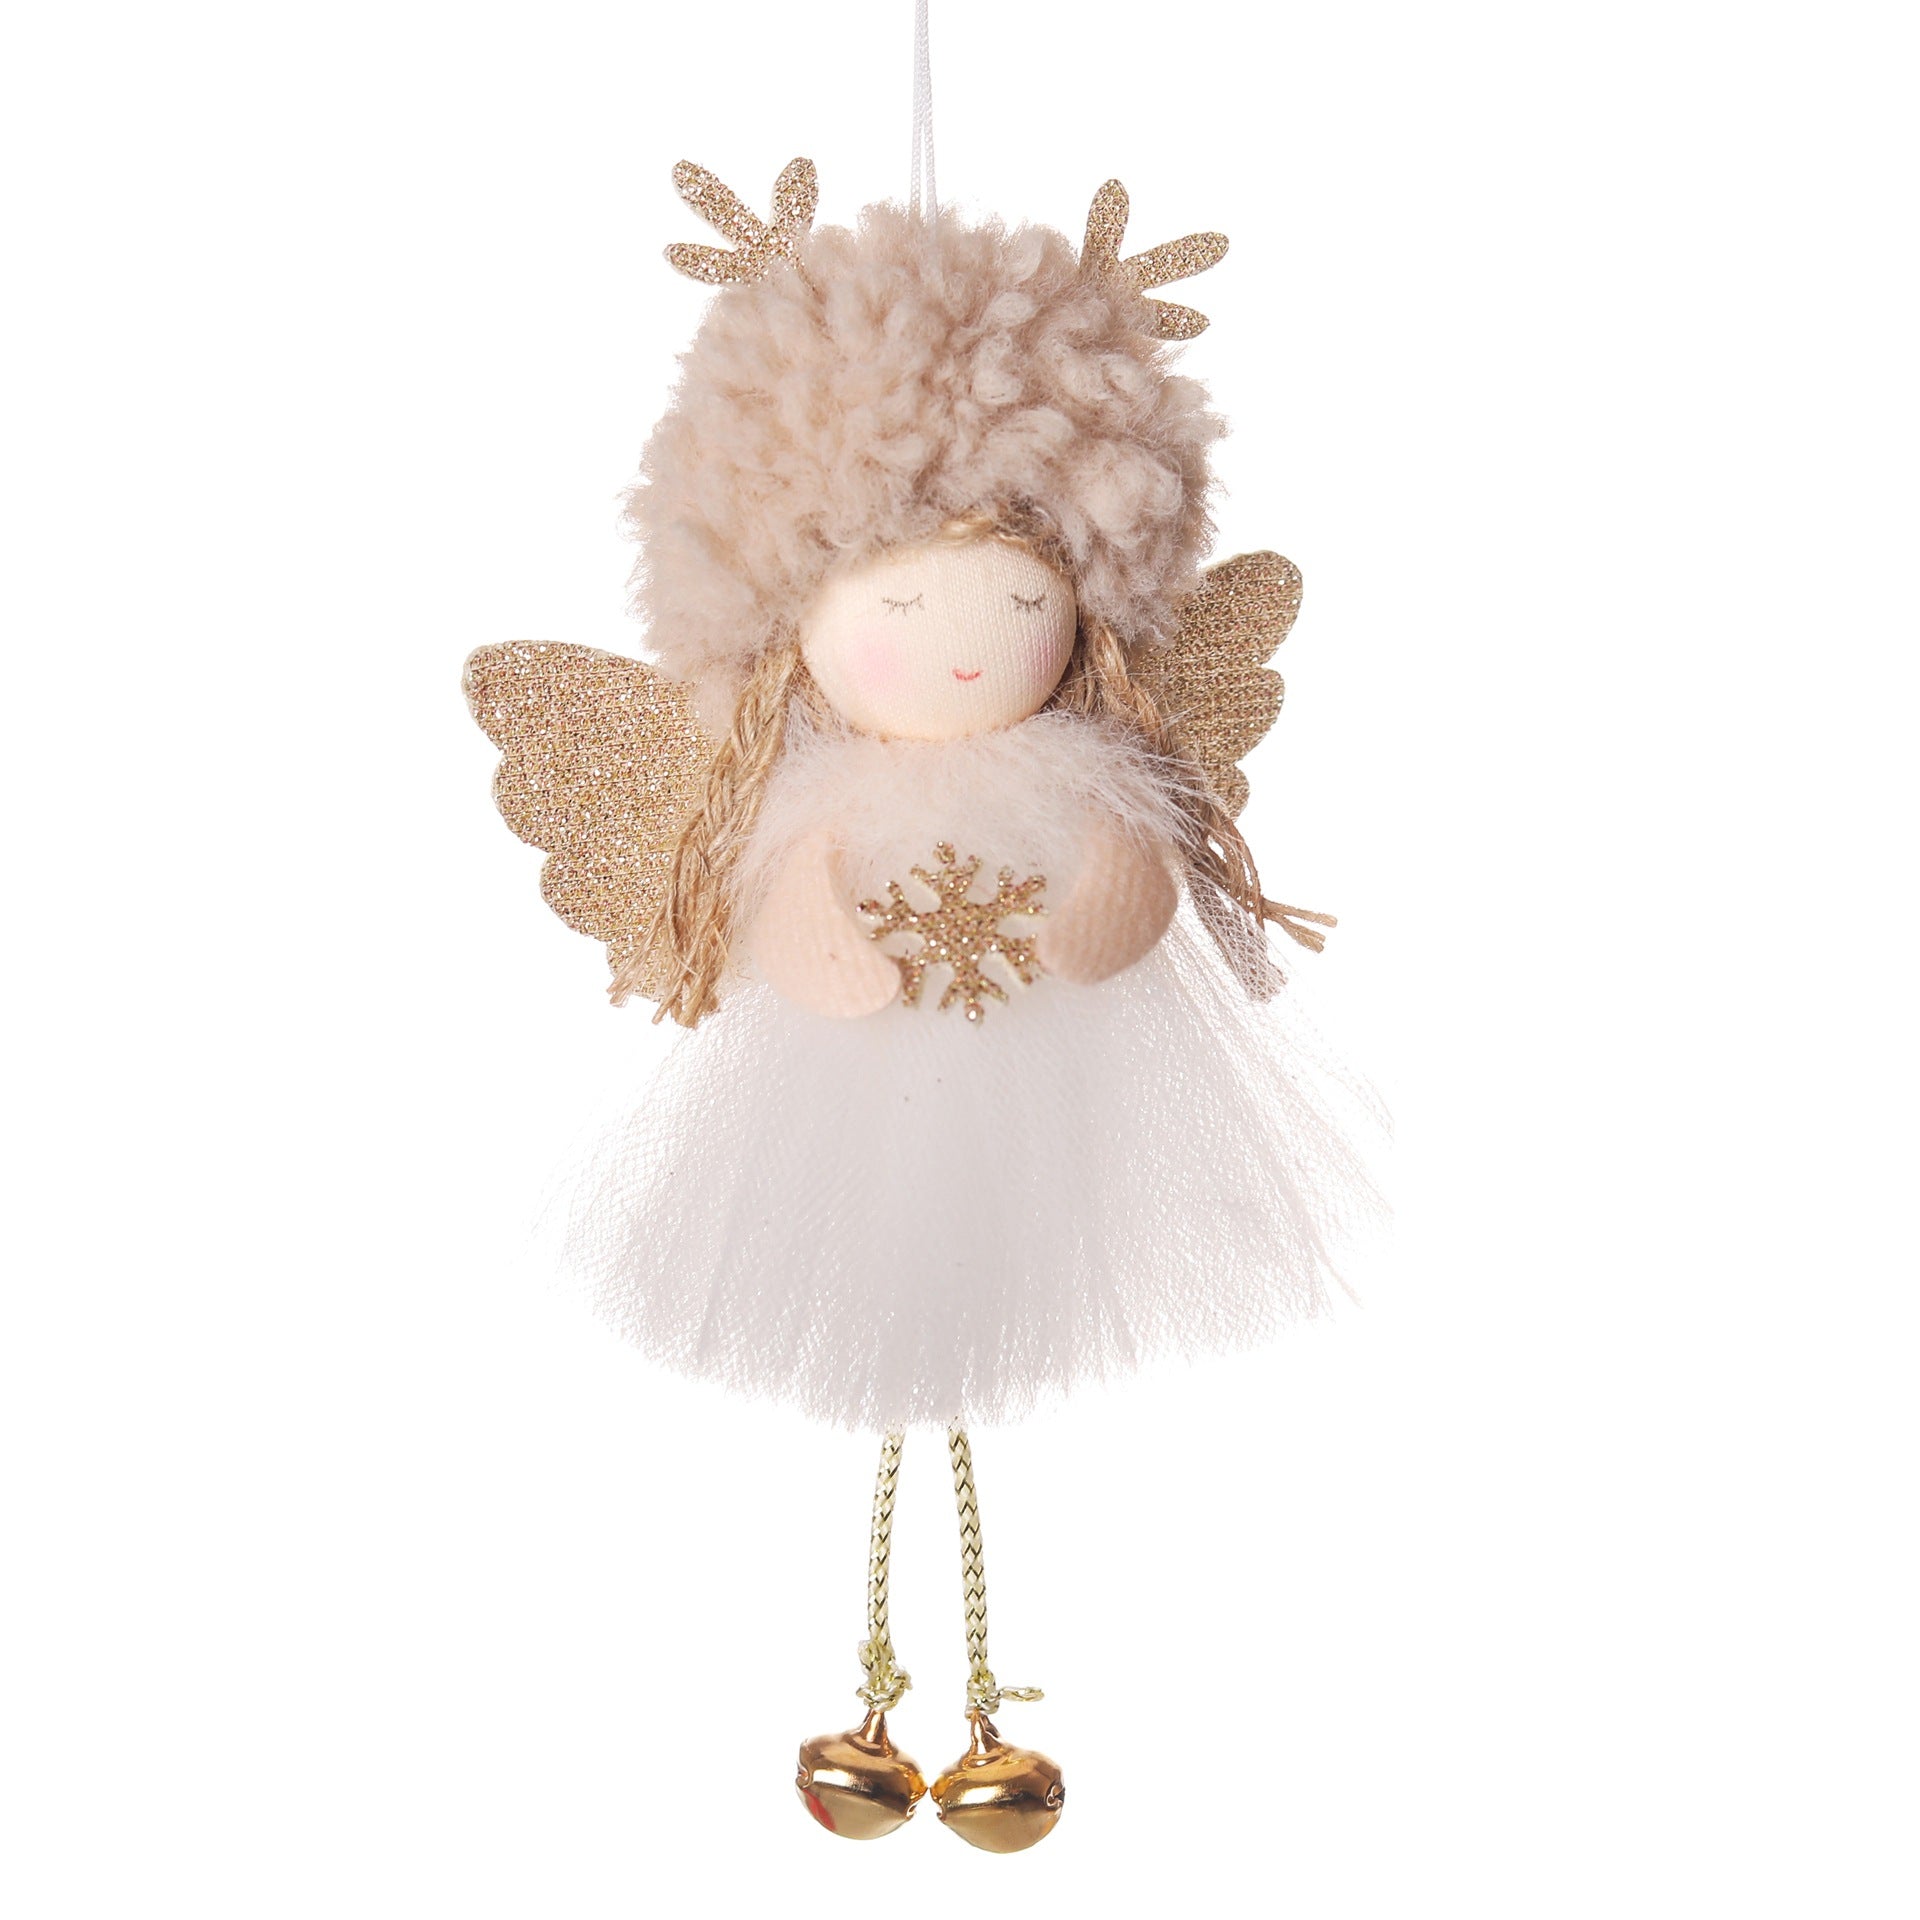 Angel Doll For Christmas Tree Hanging Ornaments - TOY-ACC-18603 - YWSYMC - 42shops